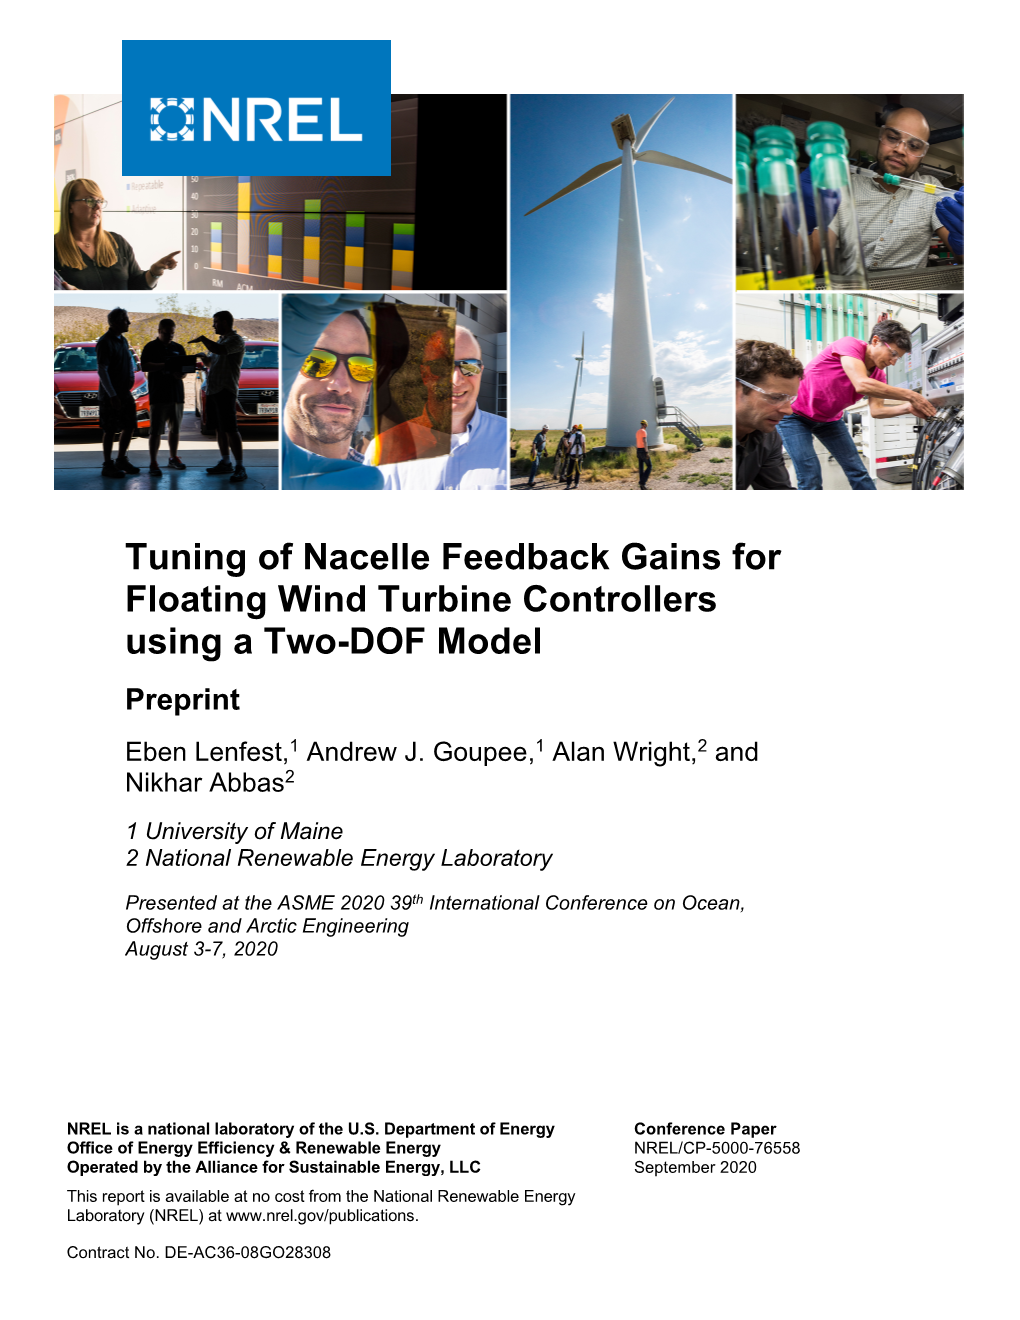 Tuning of Nacelle Feedback Gains for Floating Wind Turbine Controllers Using a Two-DOF Model Preprint Eben Lenfest,1 Andrew J